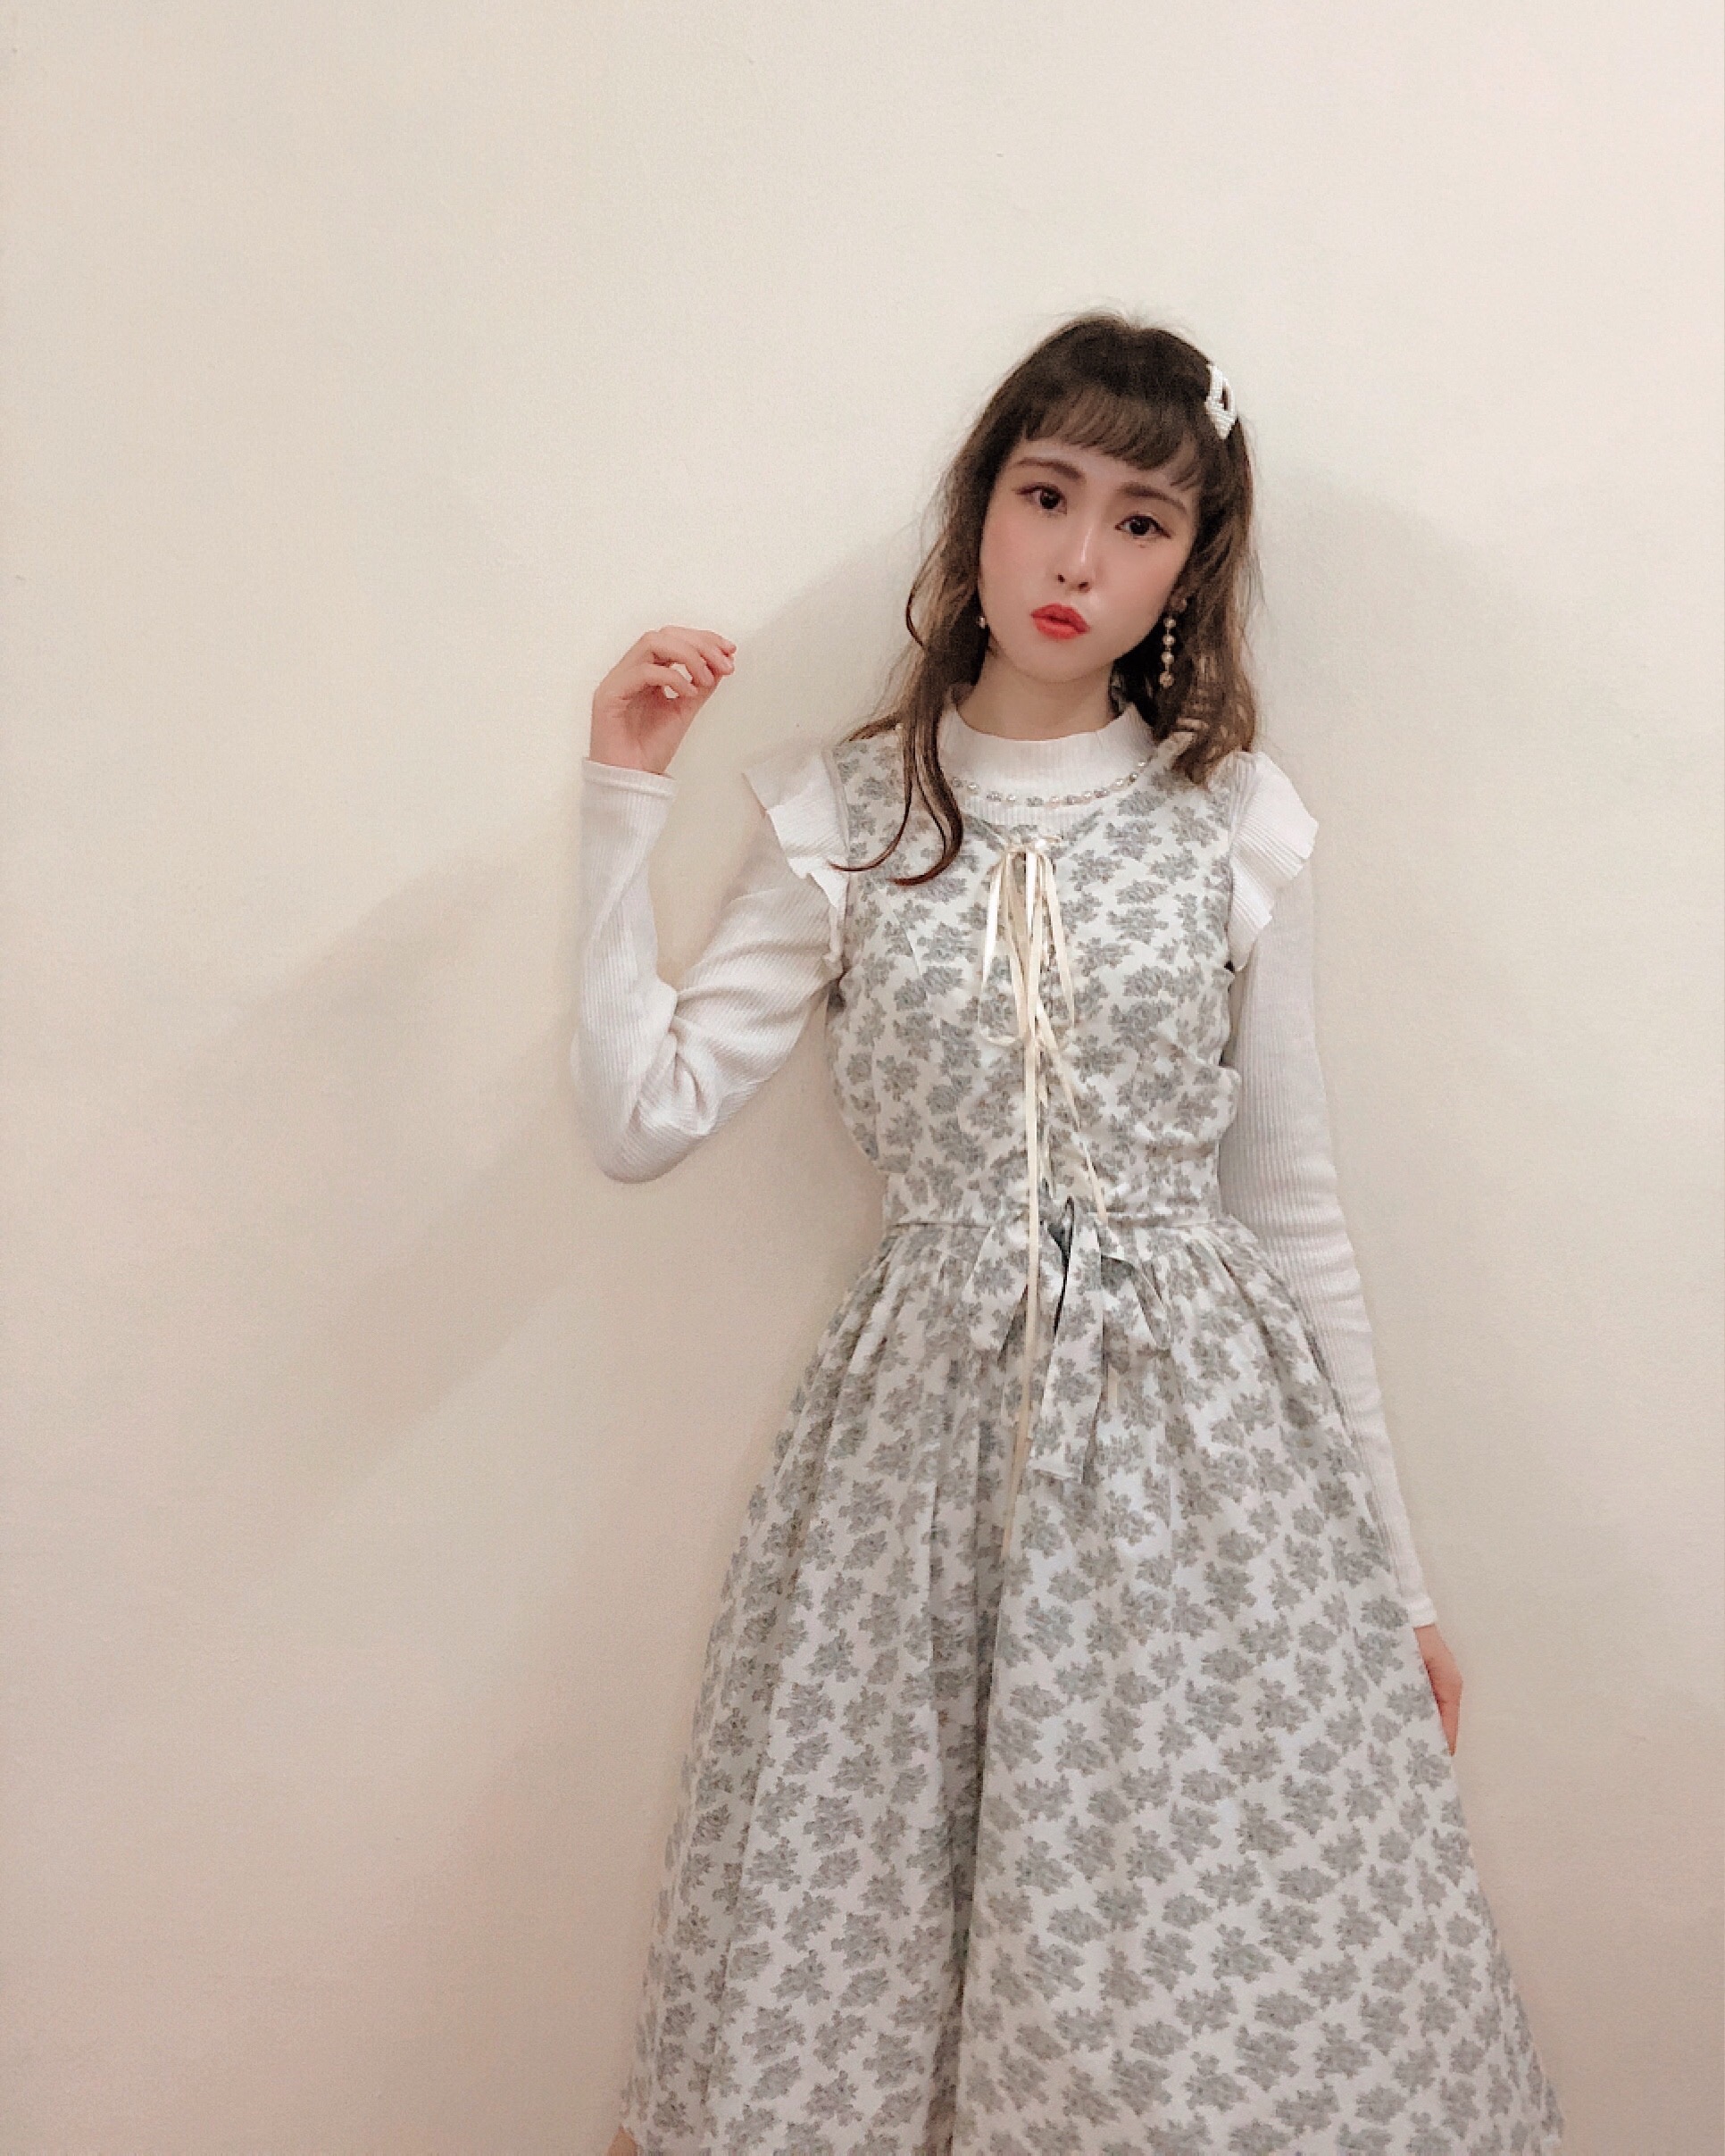 4 Floral Dress Outfits : How To Style A Floral Dress For Winter 冬の『花柄ワンピース』着回しコーデ 4選(c)MikiEsme.com